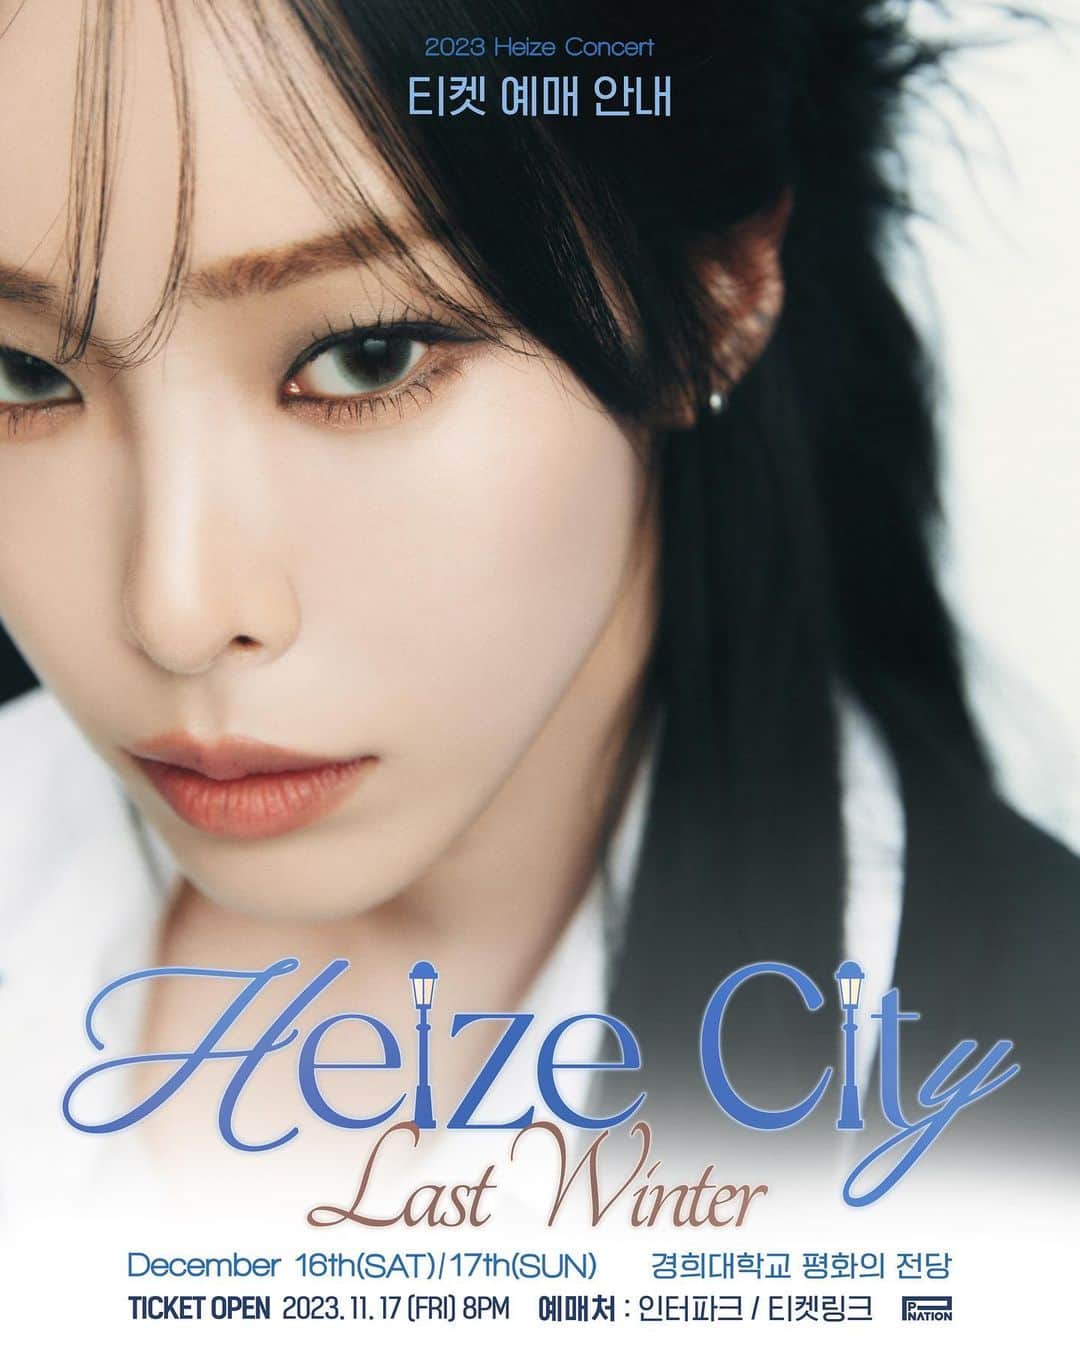 Heizeのインスタグラム：「[Heize] 2023 Heize Concert [Heize City : Last Winter]  ✔2023년 12월 16 / 17일 (December 16th, 17th) 📍경희대학교 평화의전당 (KYUNG HEE UNIVERSITY GRAND PEACE PALACE)  🔔티켓 오픈 (Ticket Open) : 11/17 8PM (KST) 🔗Ticket : Link in bio  @heizeheize from @pnation.official  #헤이즈 #Heize #concert #HeizeCity #헤이즈시티 #LastWinter #PNATION #피네이션」